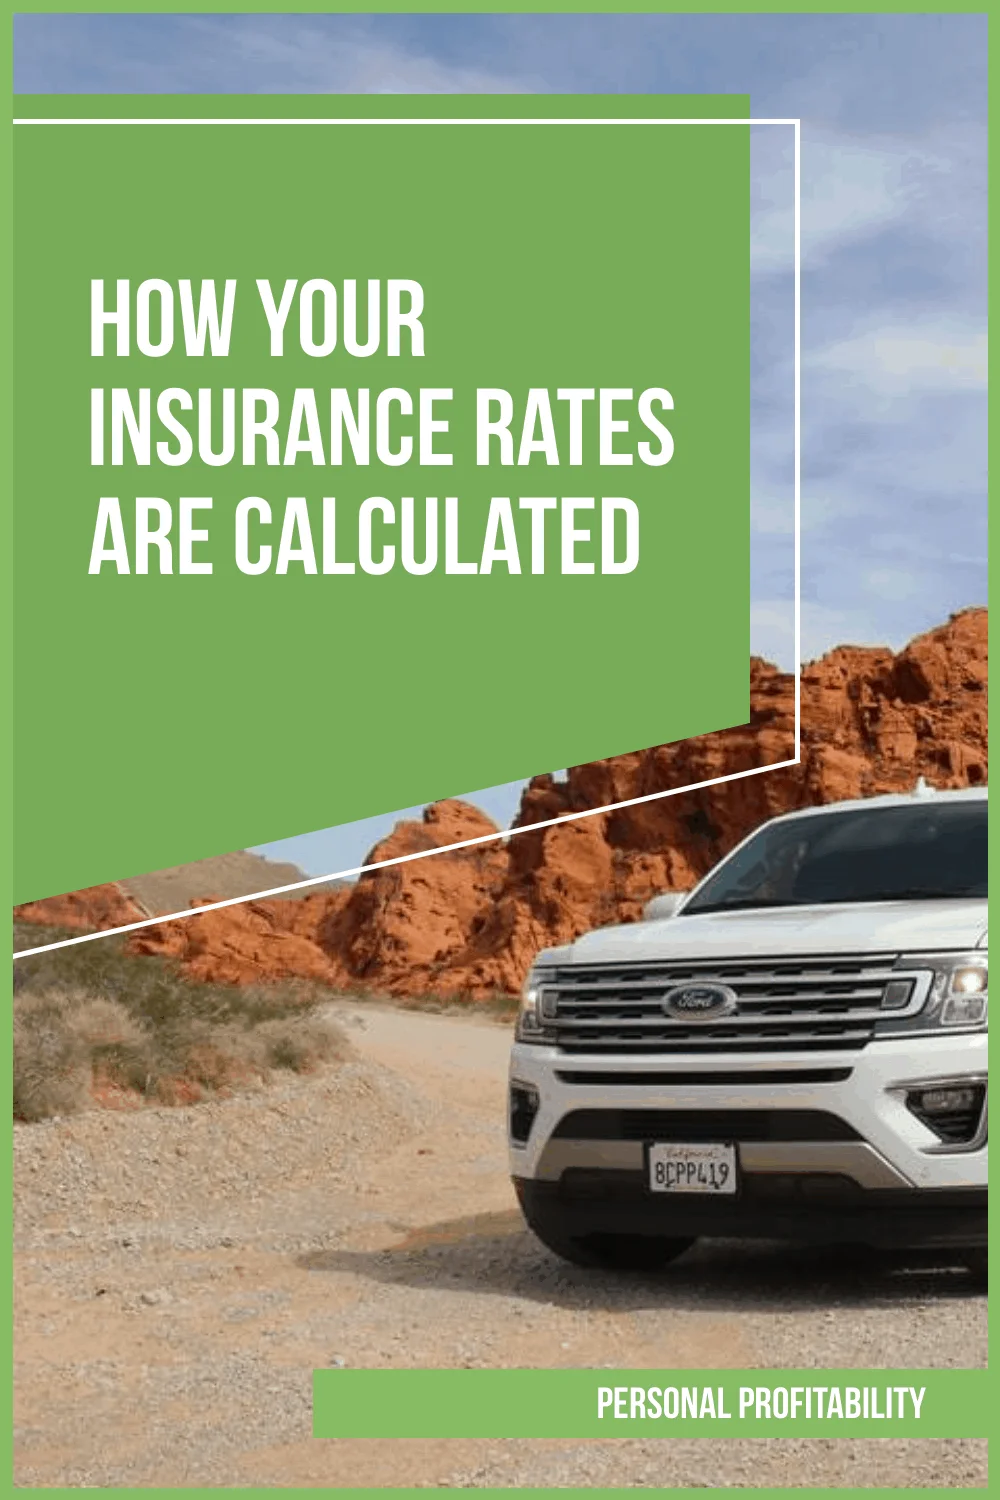 How Your Insurance Rates Are Calculated